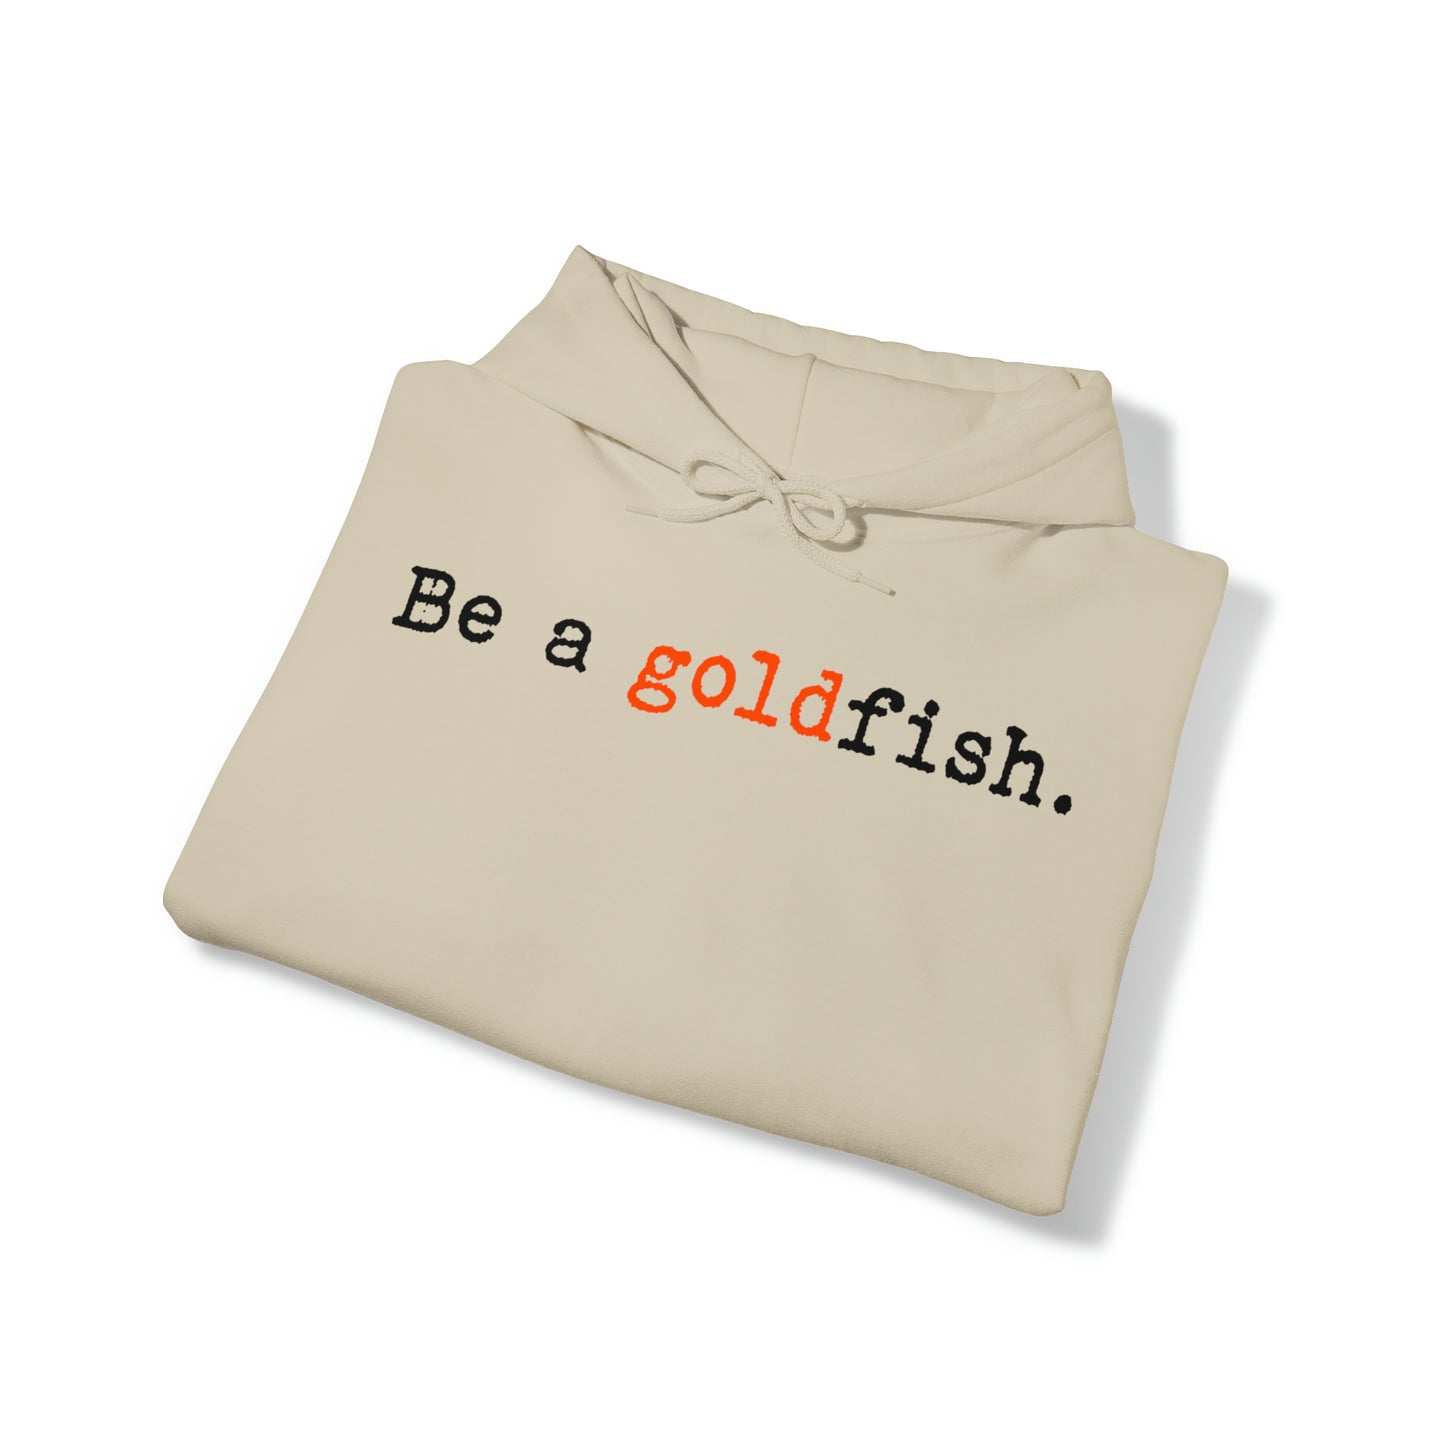 Be a Goldfish Sand Hoodie